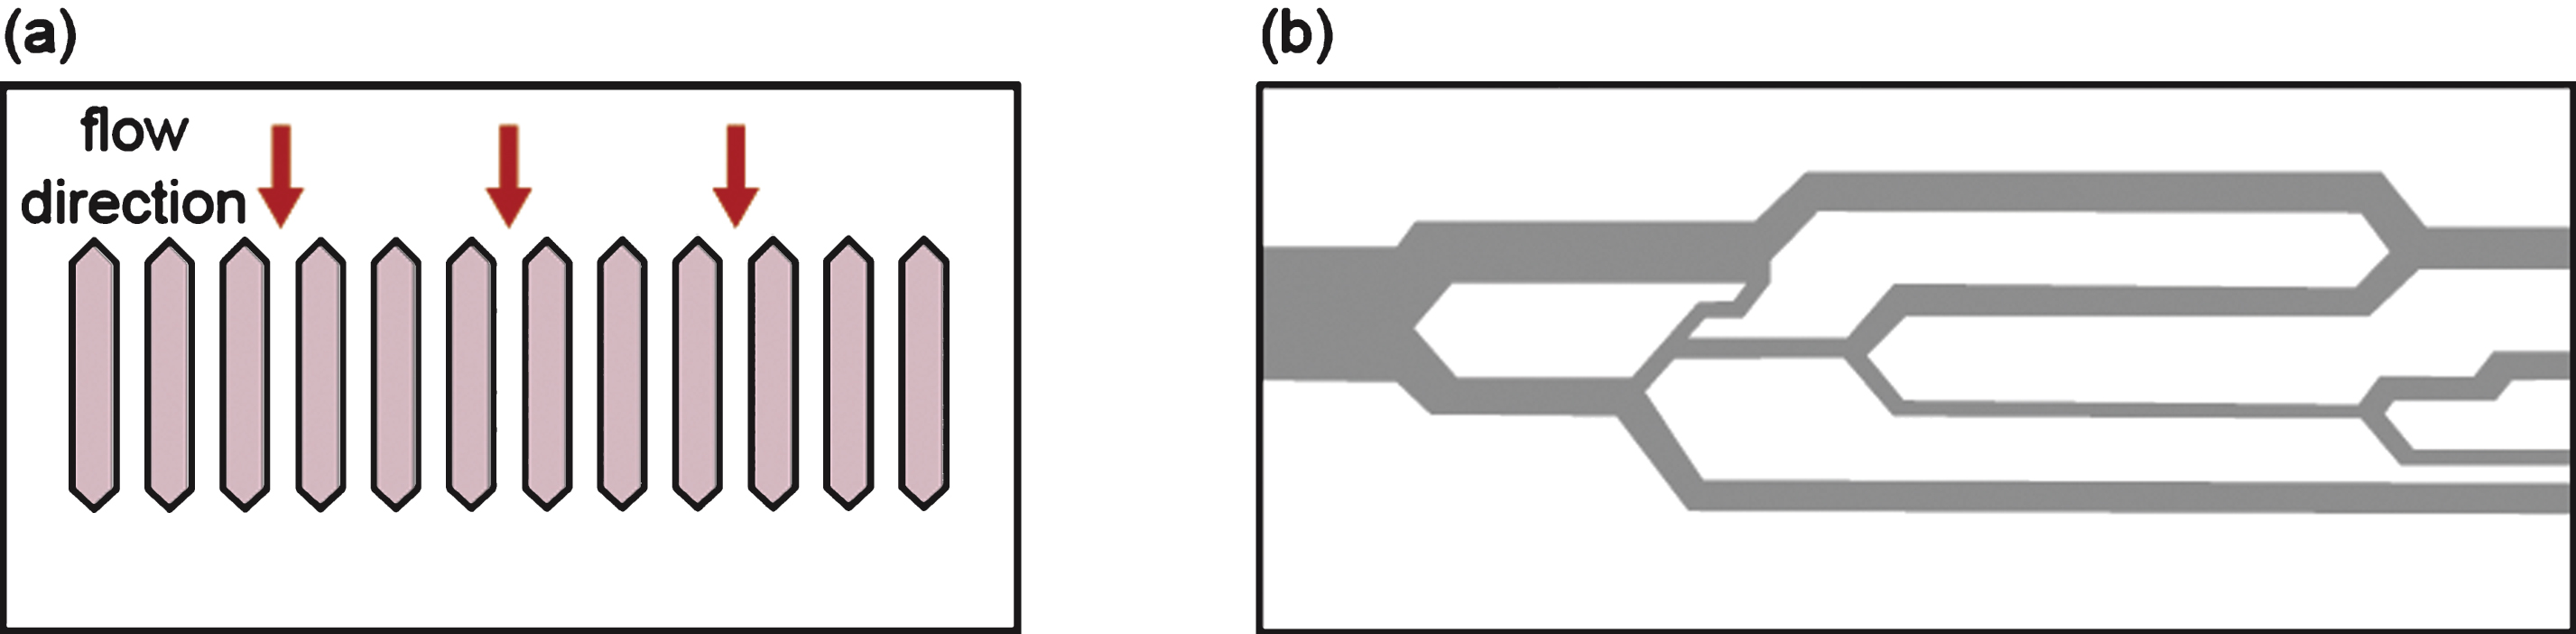 Microfluidic filtration with (a) an array of parallel microchannels and (b) an artificial microvascular network can be used to measure the deformability of red blood cells.